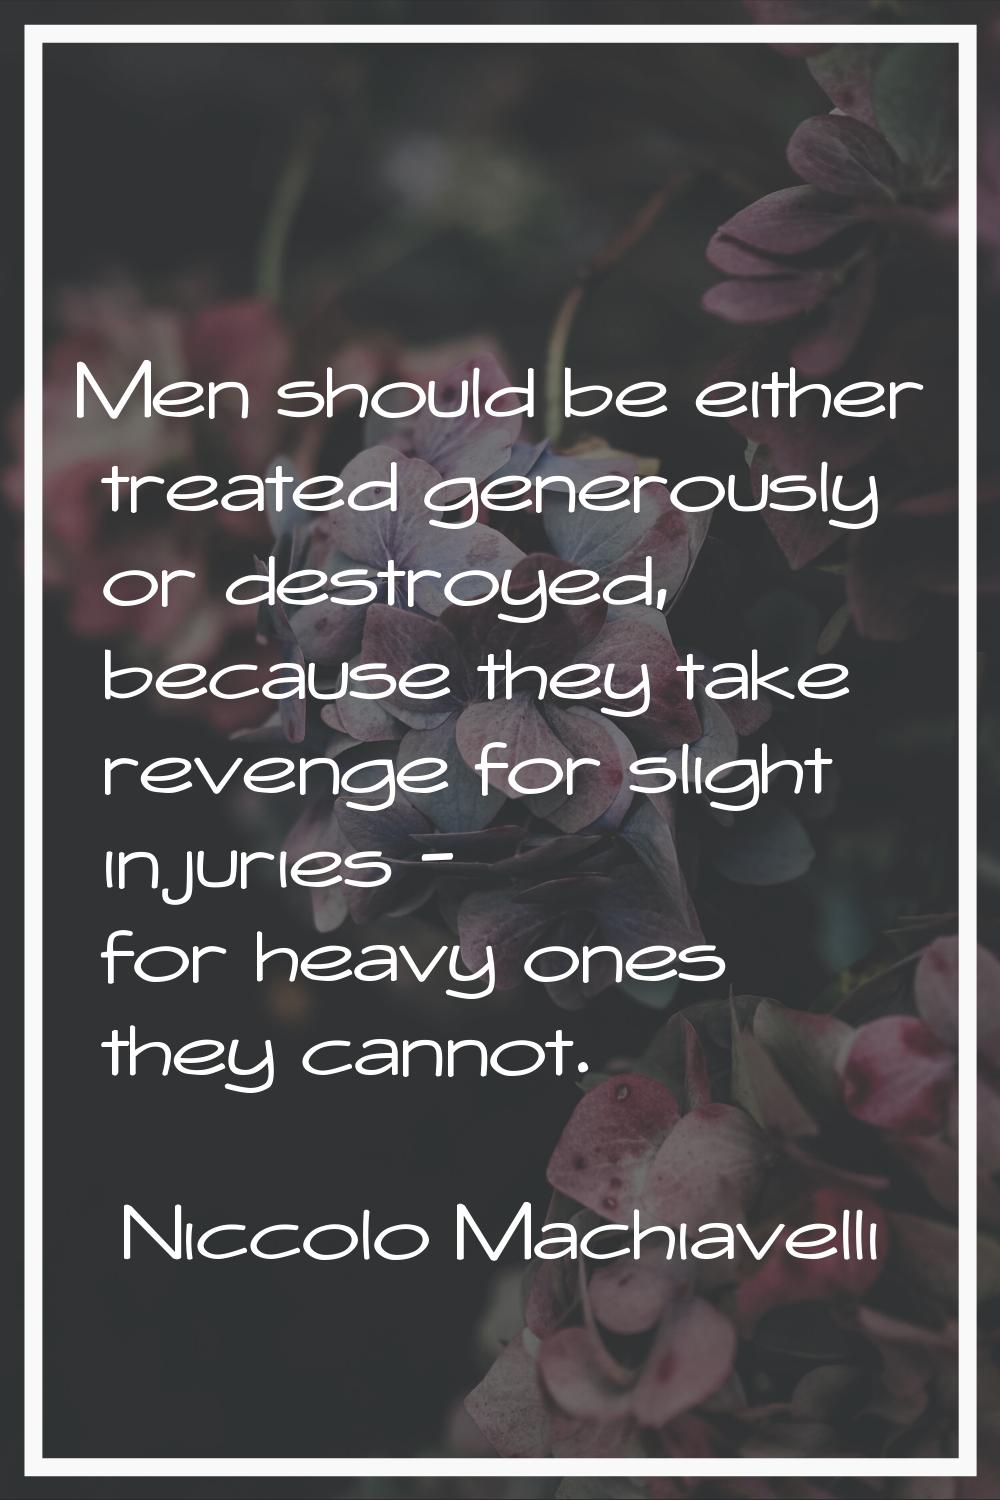 Men should be either treated generously or destroyed, because they take revenge for slight injuries